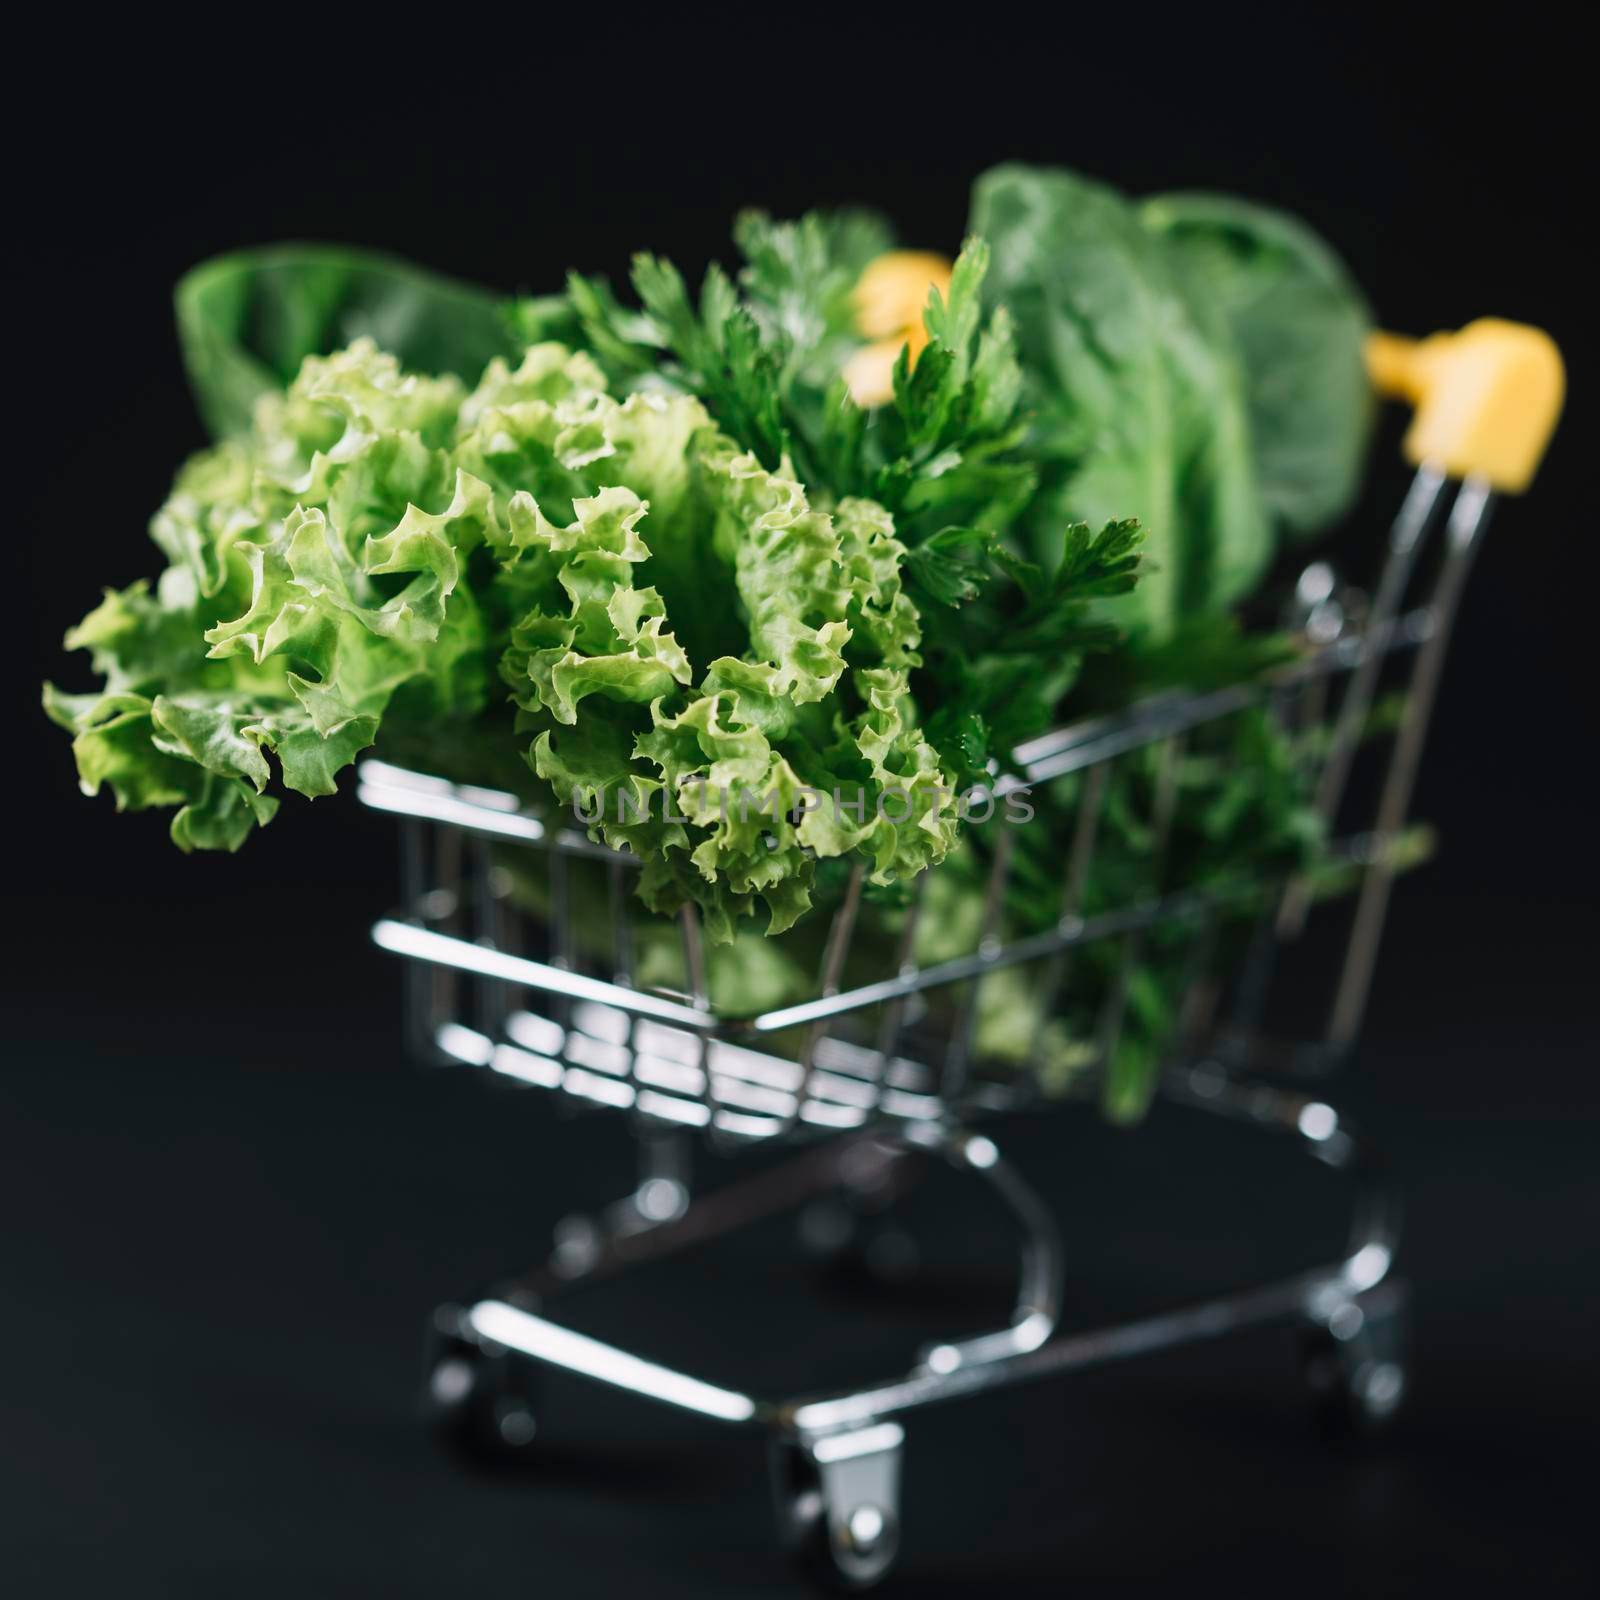 close up green leafy vegetables shopping cart black backdrop. High resolution photo